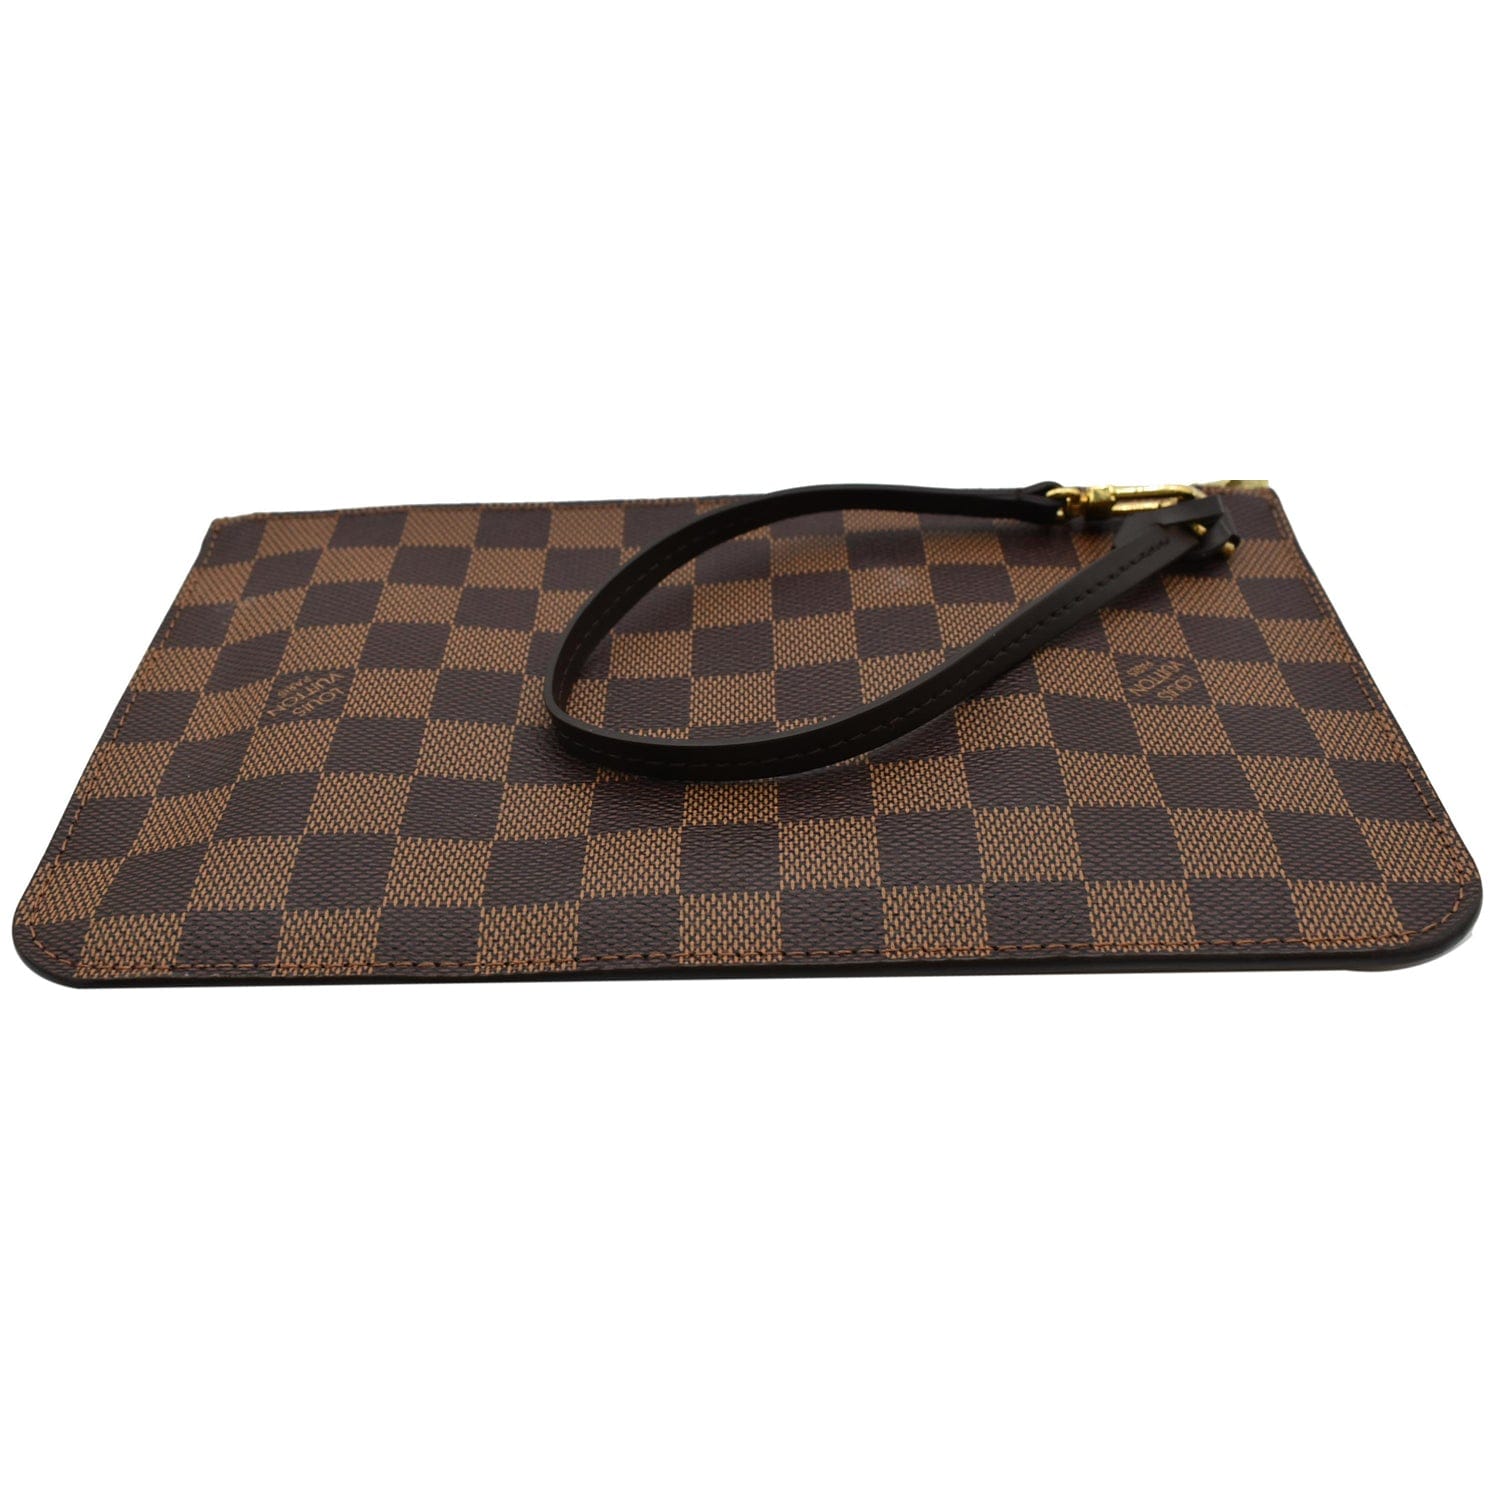 Louis Vuitton Neverfull MM in Damier Ebene without Zip Pouch - SOLD